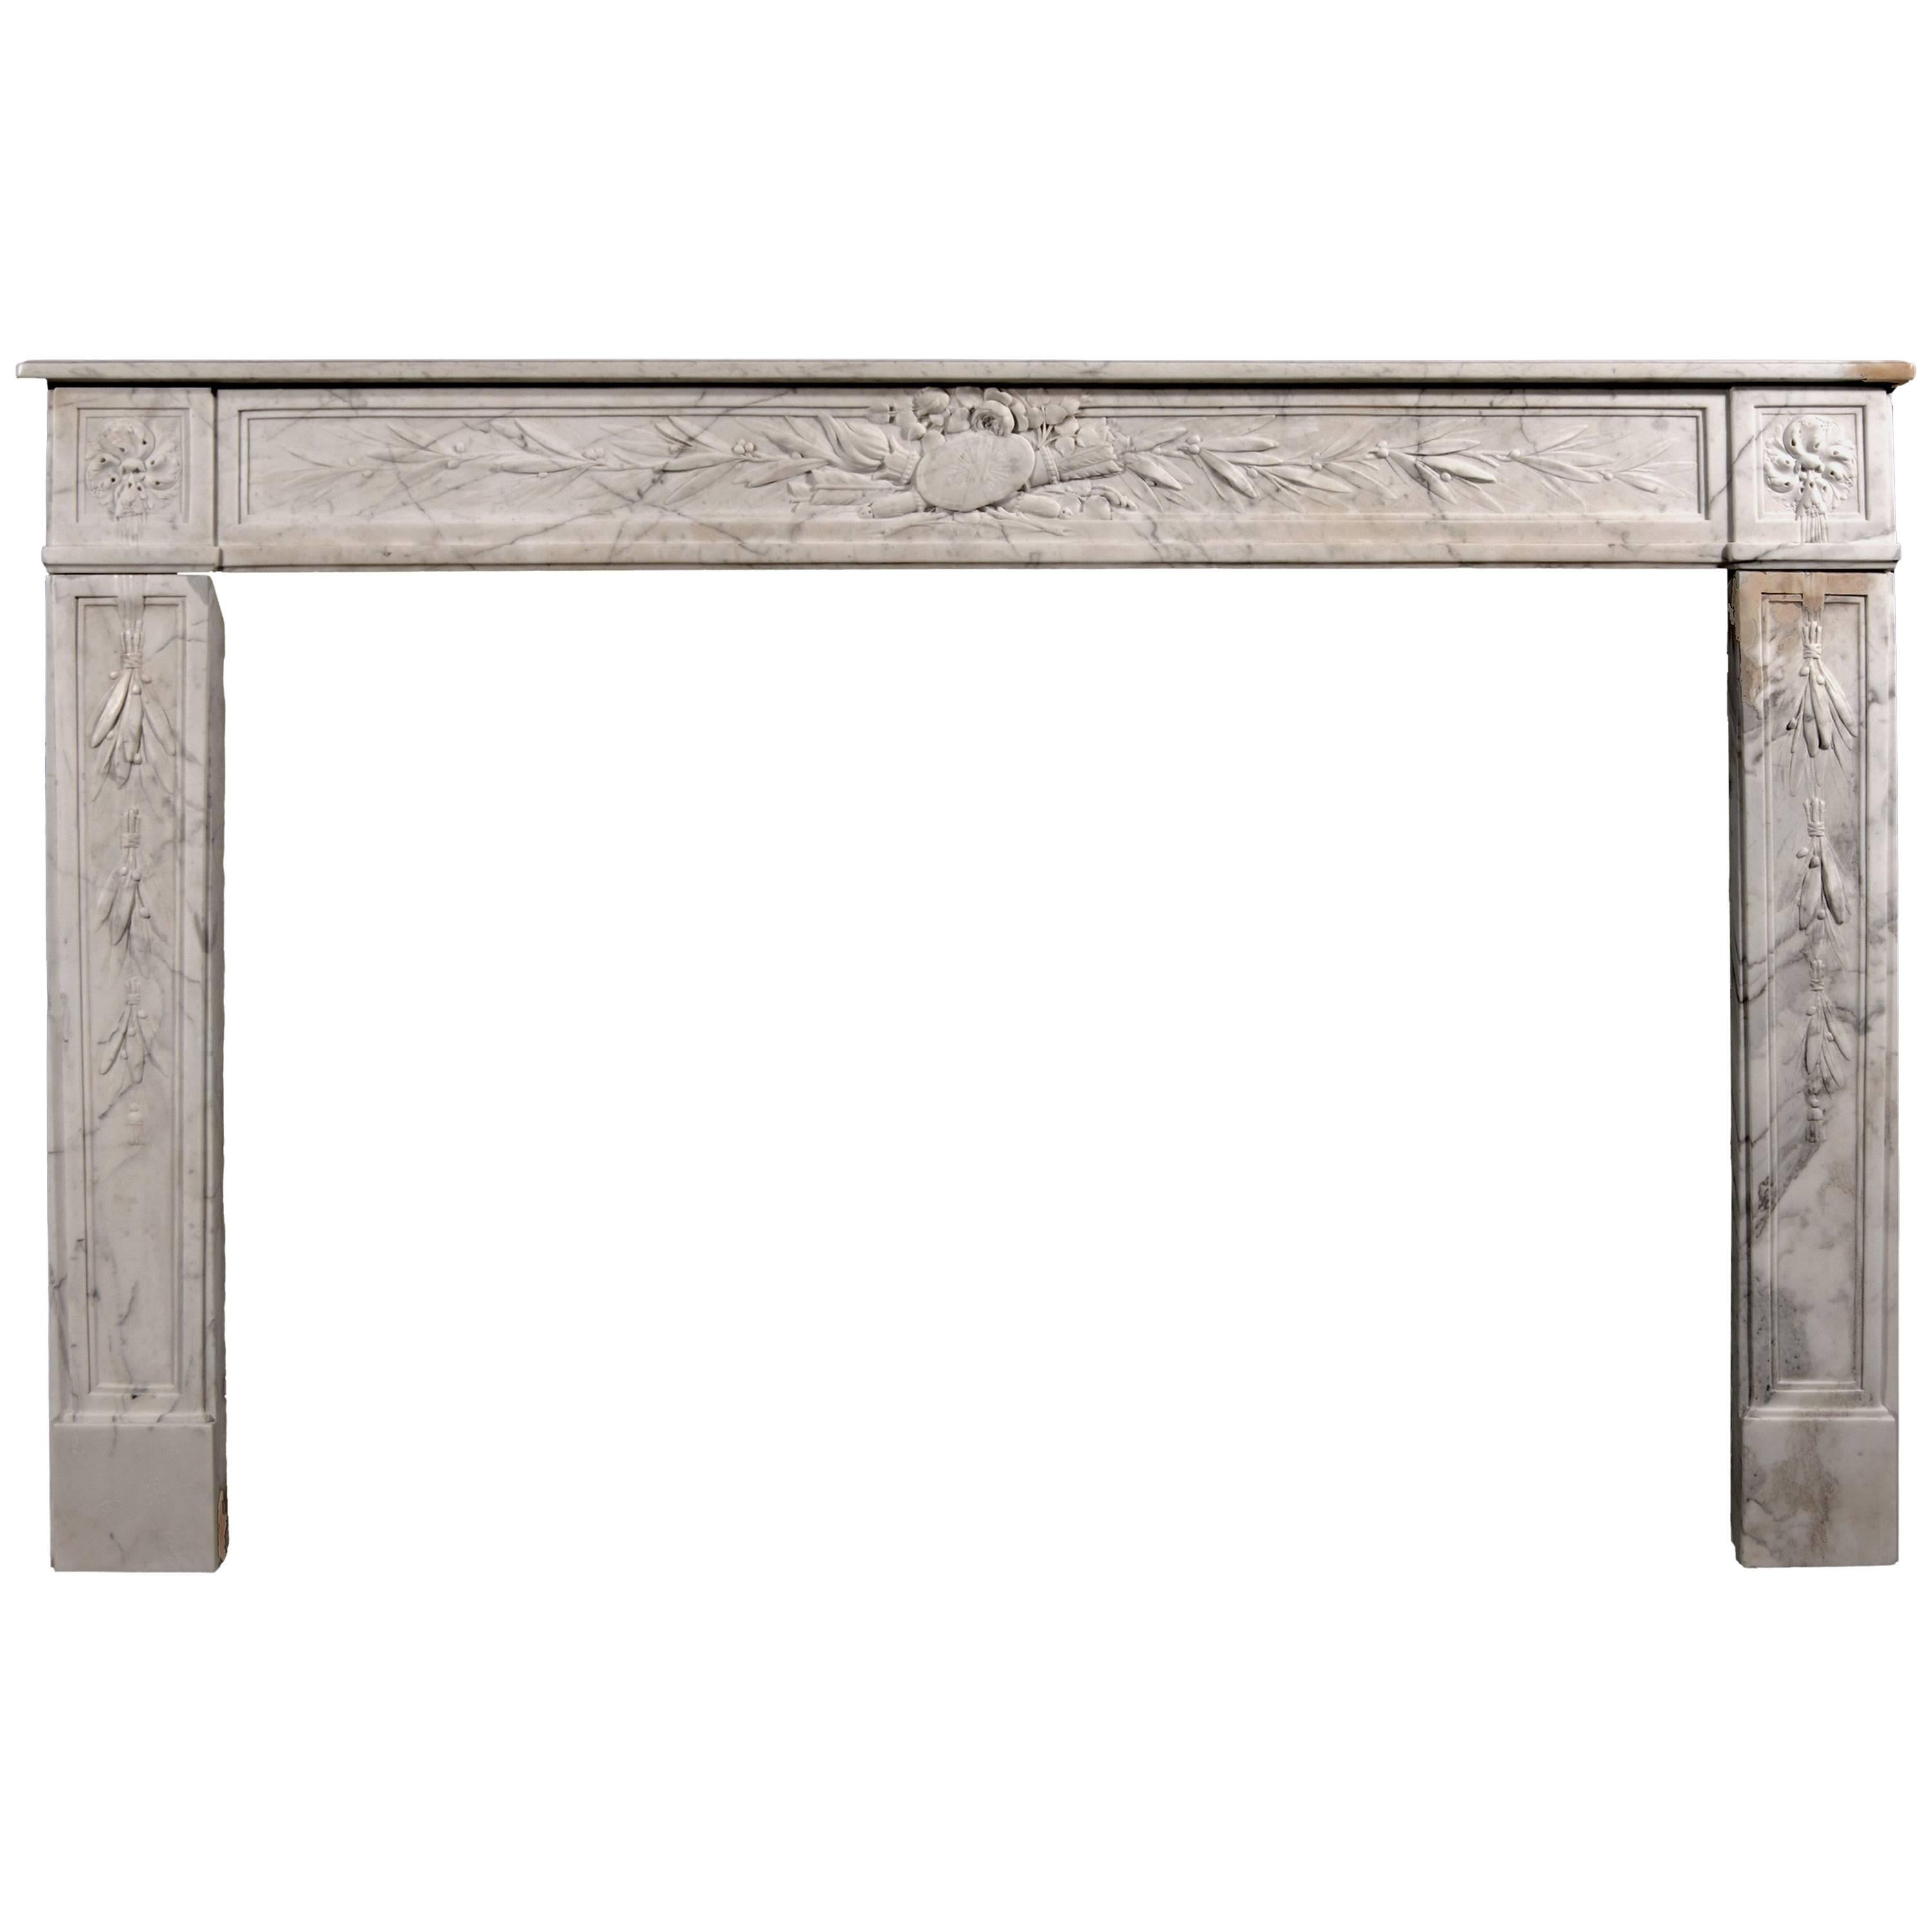 18th Century French Louis XVI Veined White Marble Fireplace